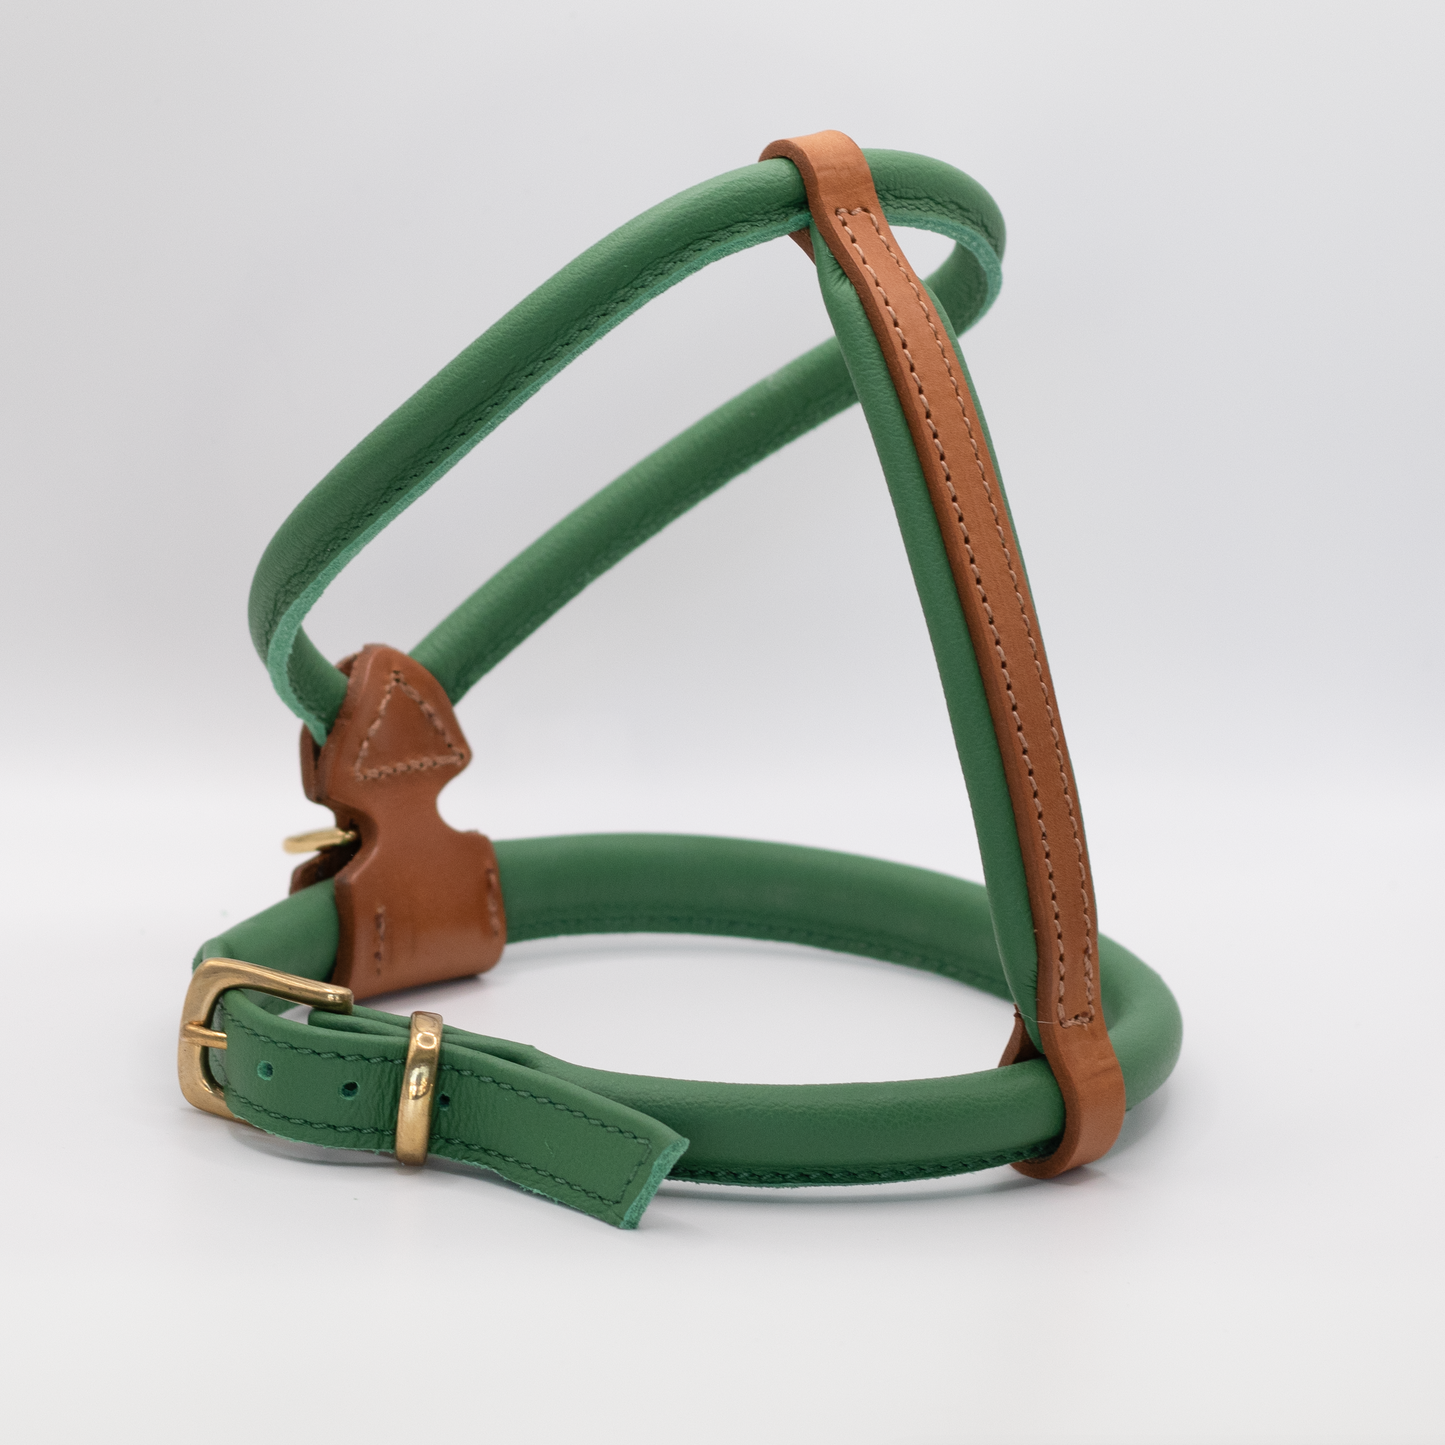 D&H Rolled Leather Dog Harness Clover